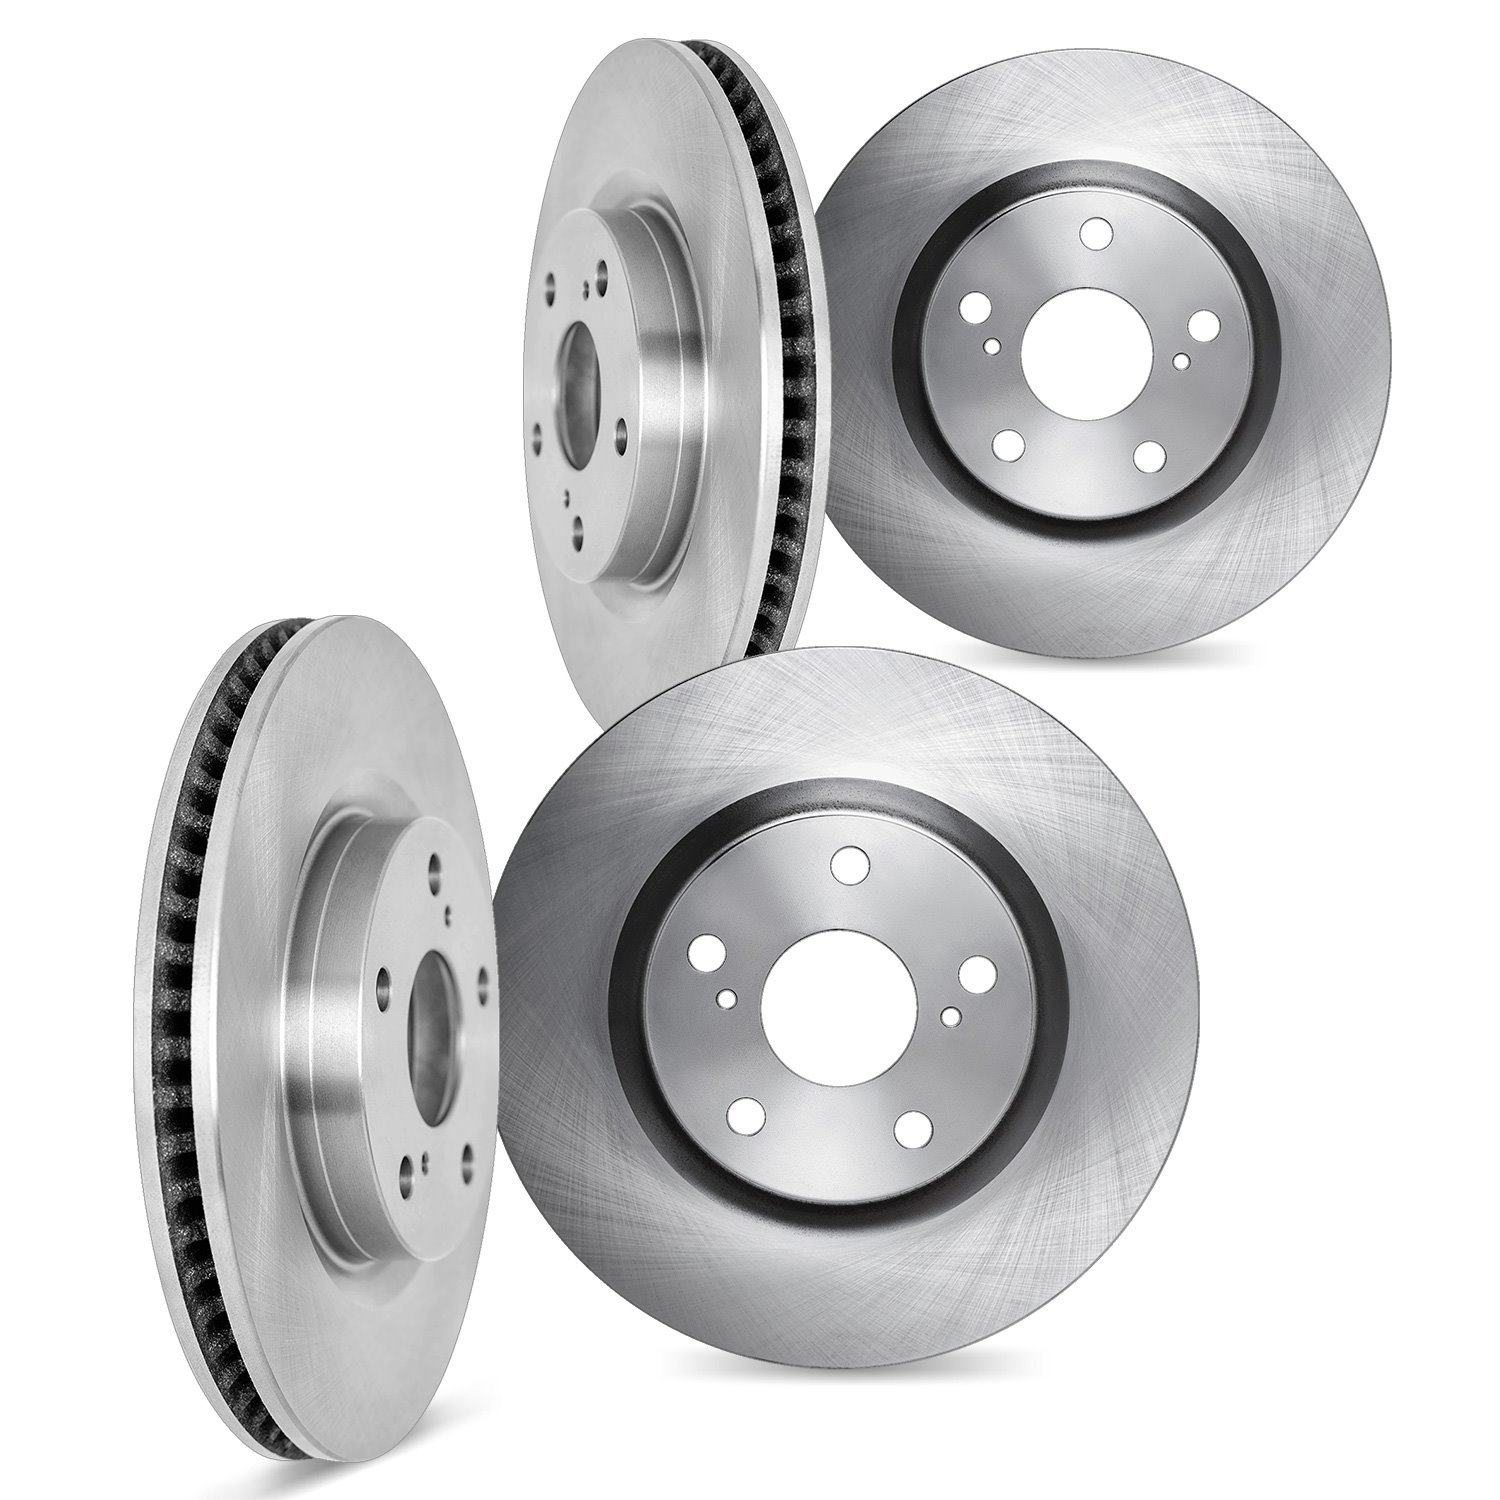 6004-76347 Brake Rotors, Fits Select Lexus/Toyota/Scion, Position: Front and Rear